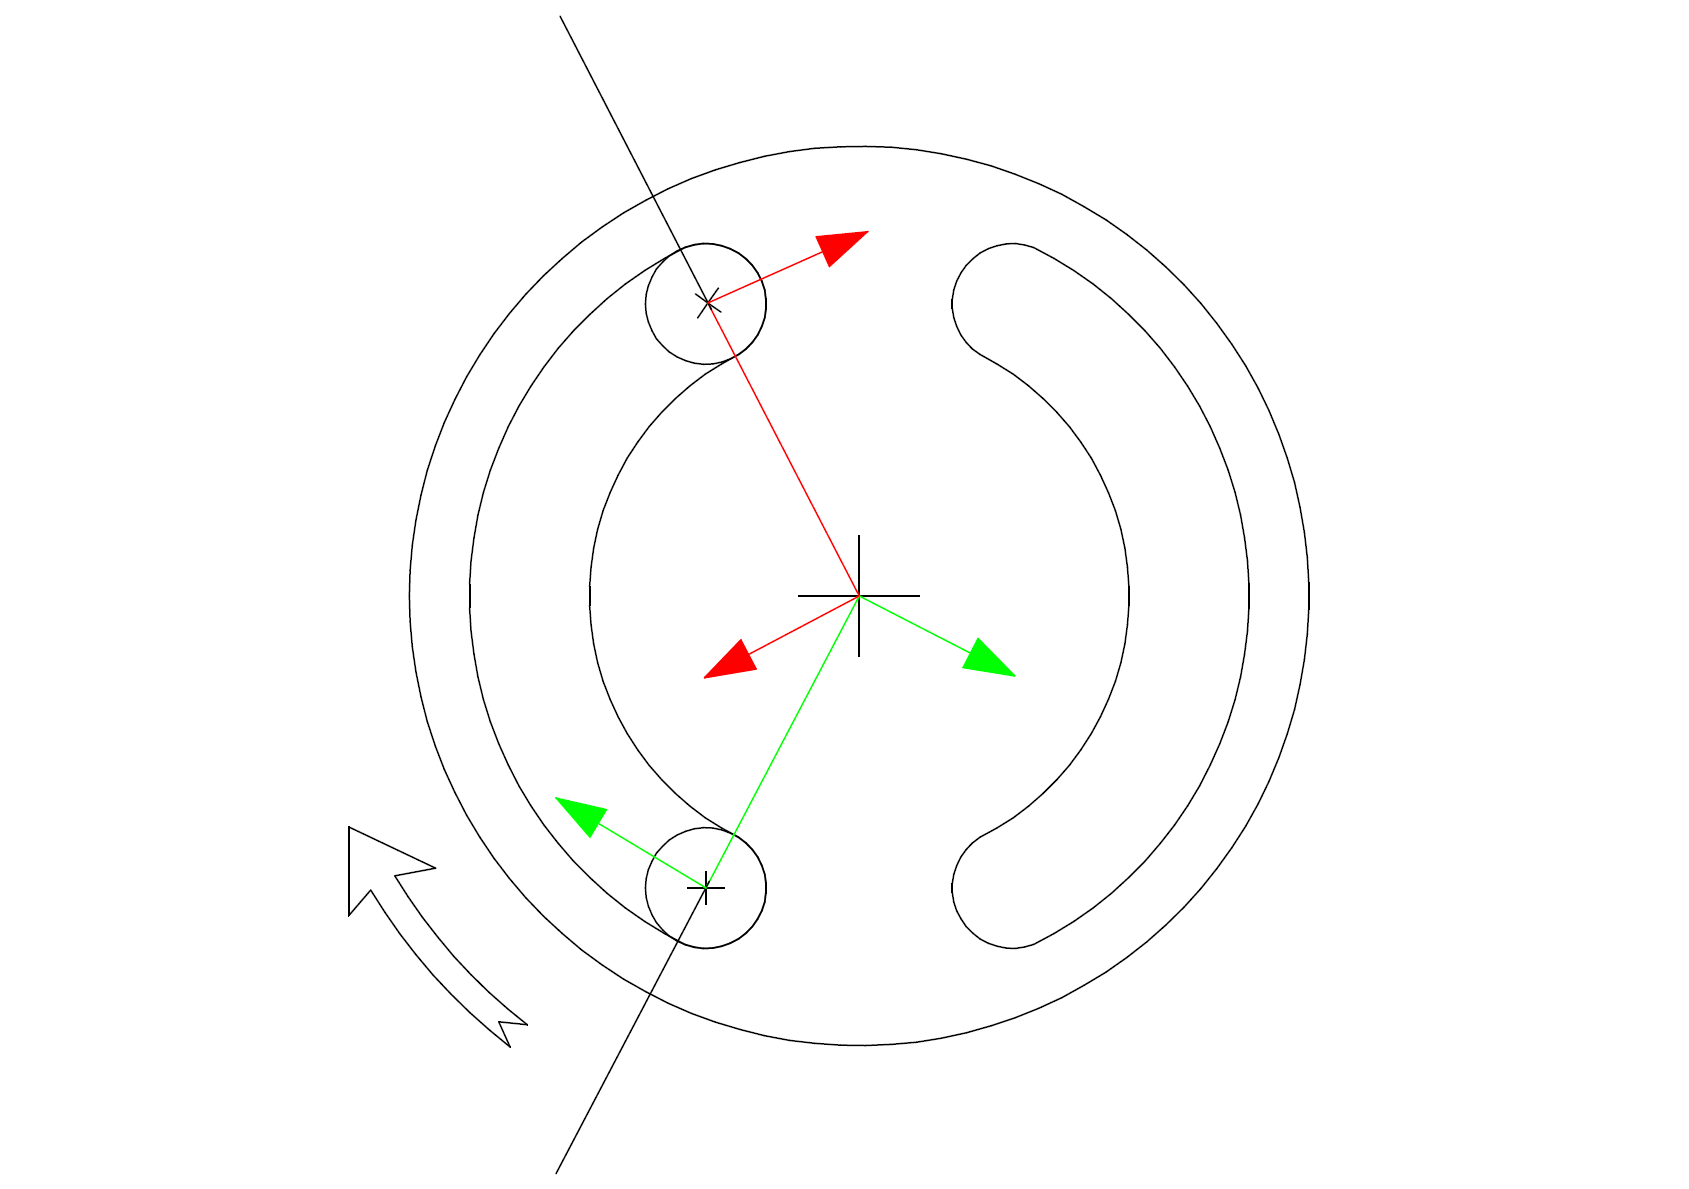 Imagine an axial-piston rotary group with a single piston